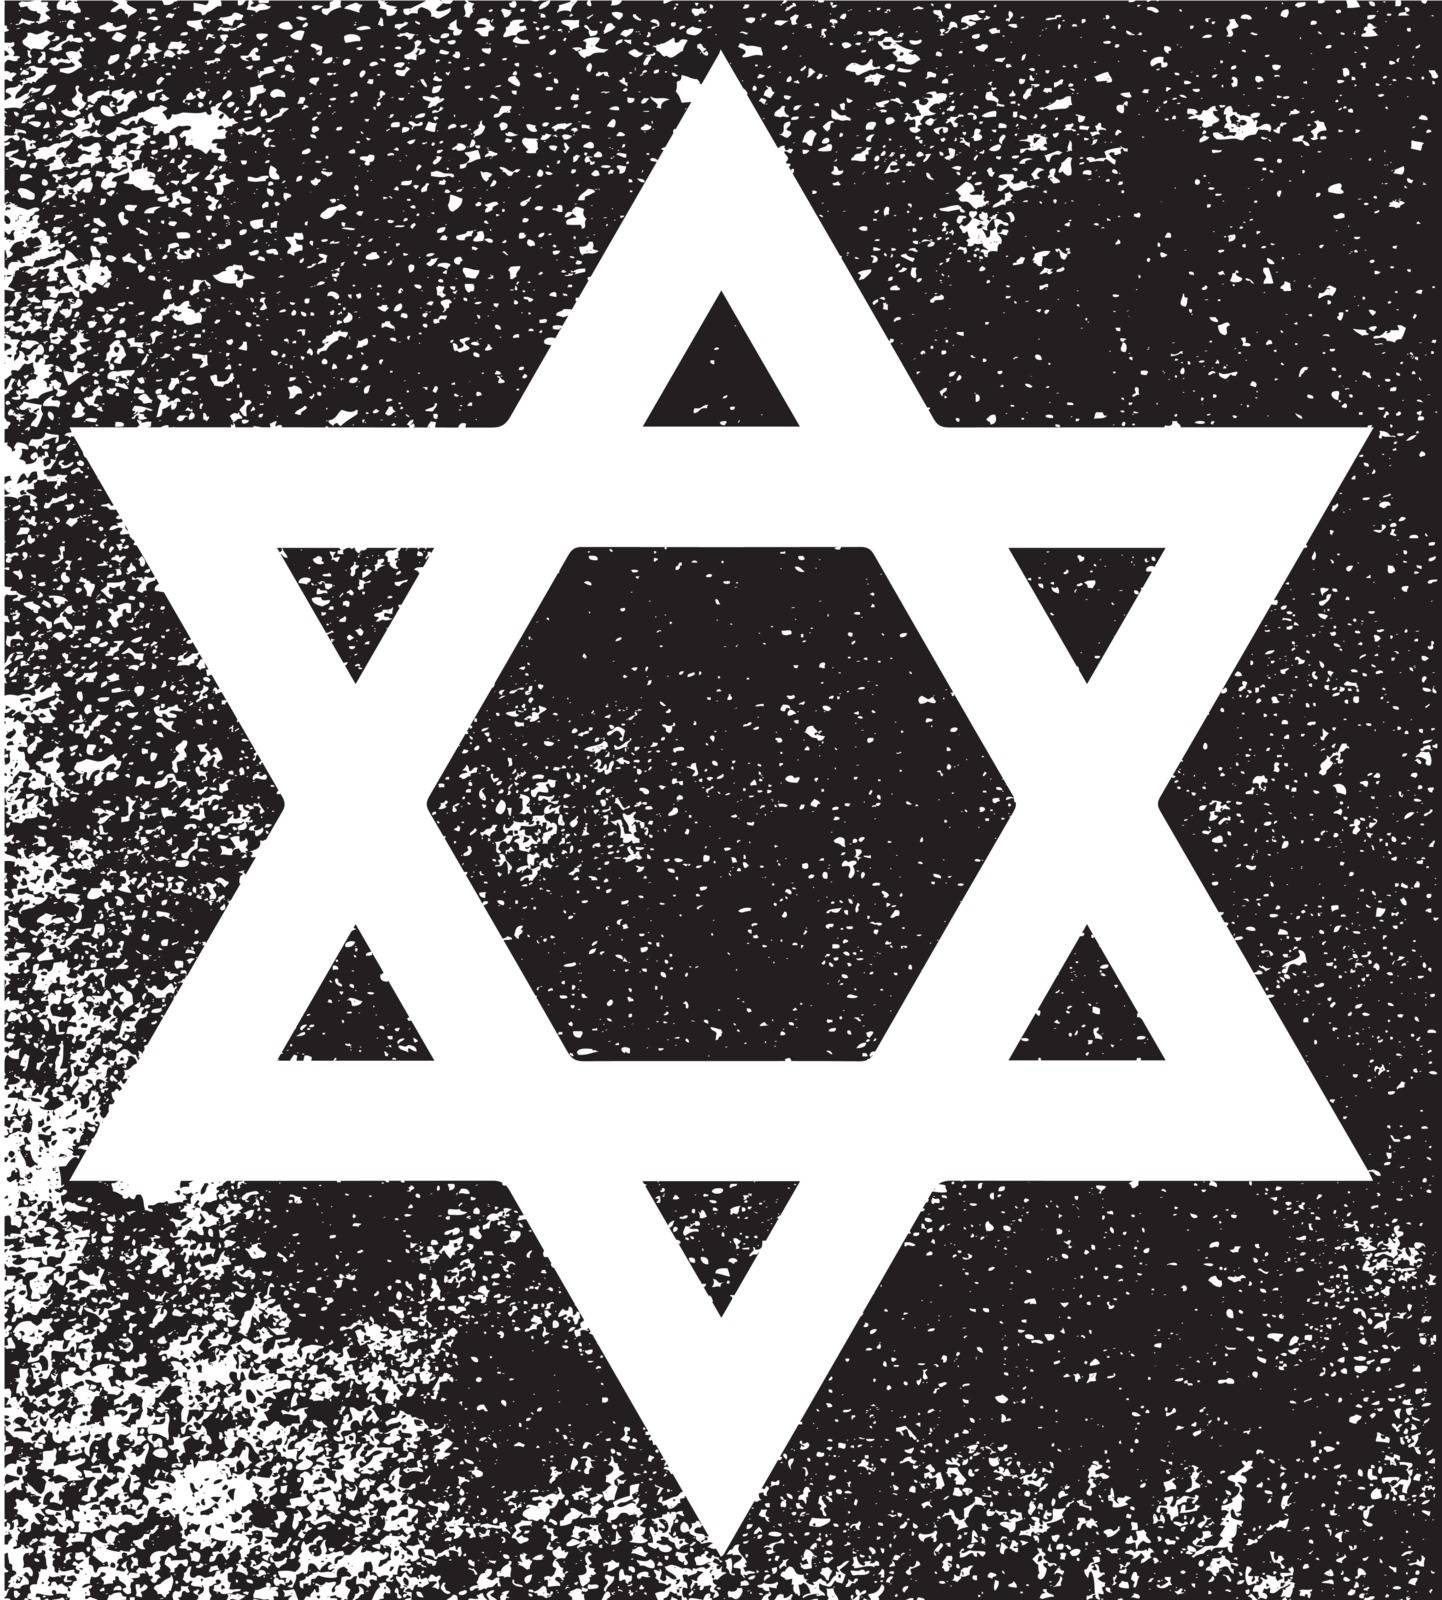 Star of the Flag of Israel in black and white half tone with grunge effect